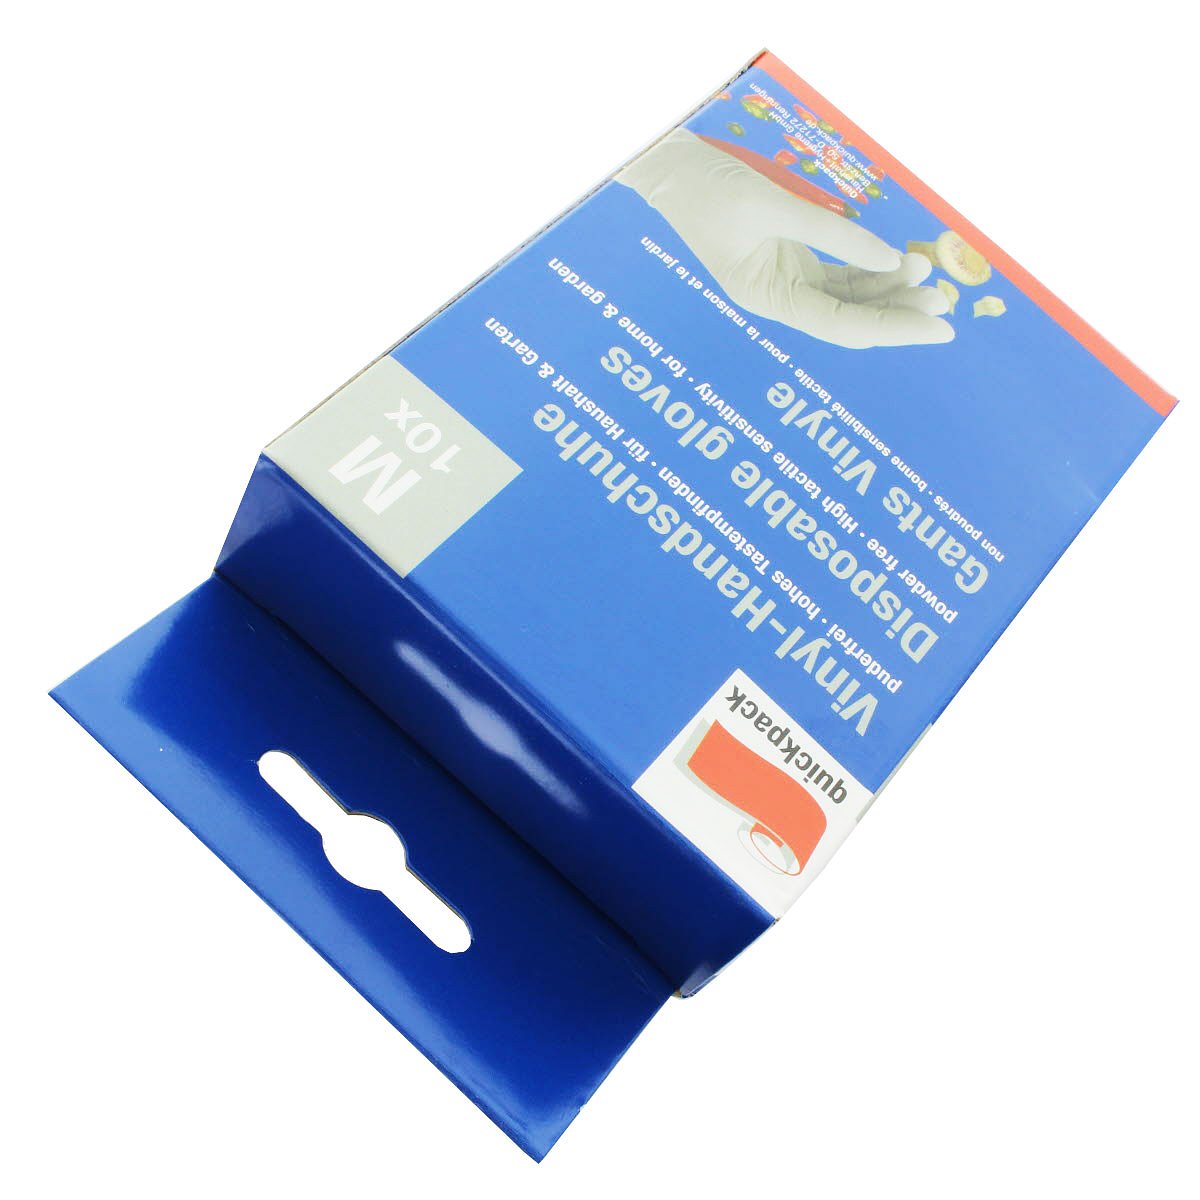 The white vinyl gloves in a pack of 10, size M.